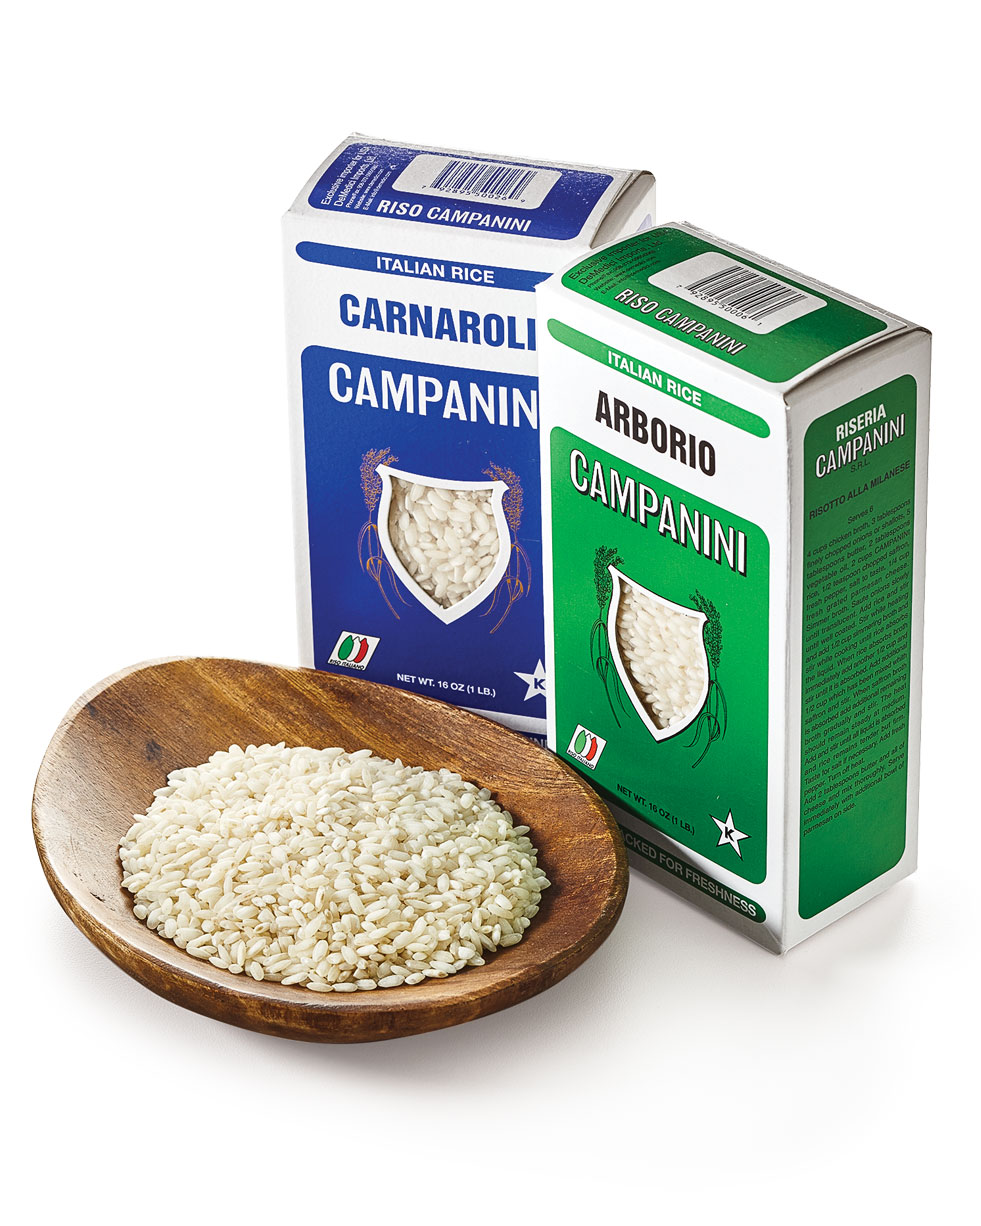 What type of rice is used for risotto? What's the difference between Arborio and Carnaroli rice?